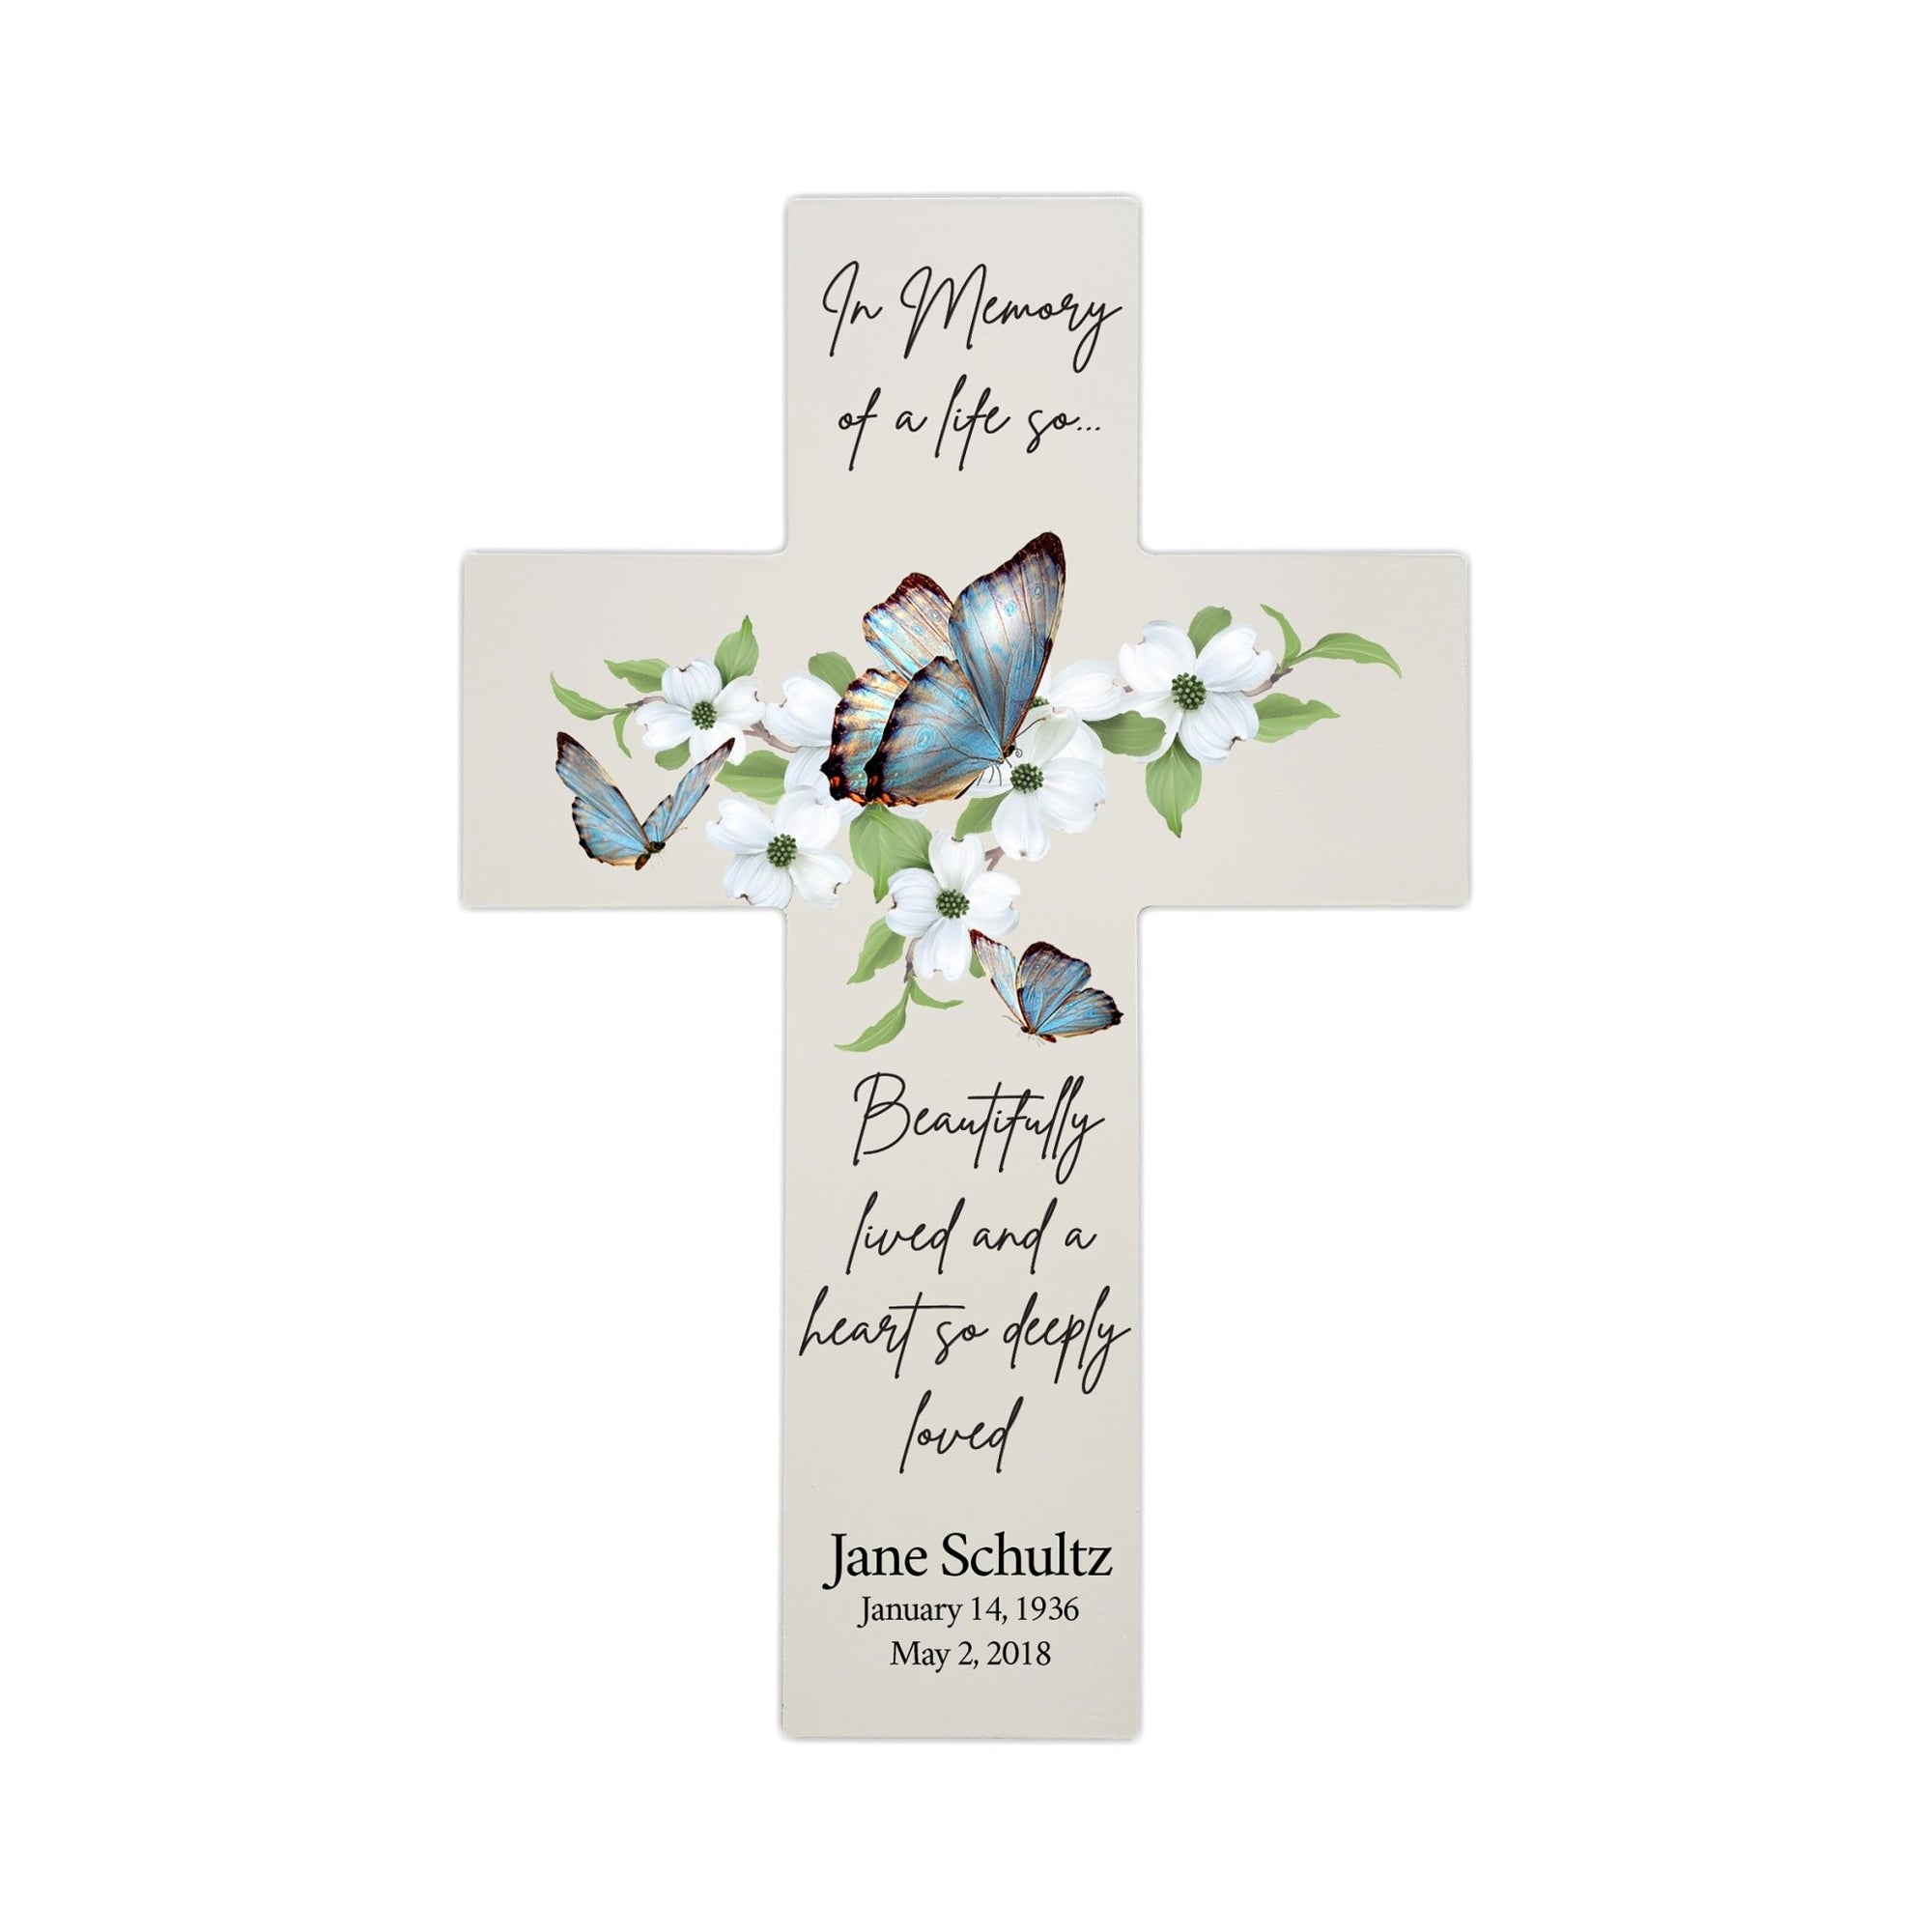 Personalized Wooden Memorial Bereavement Wall Cross - In Memory of a Life - LifeSong Milestones